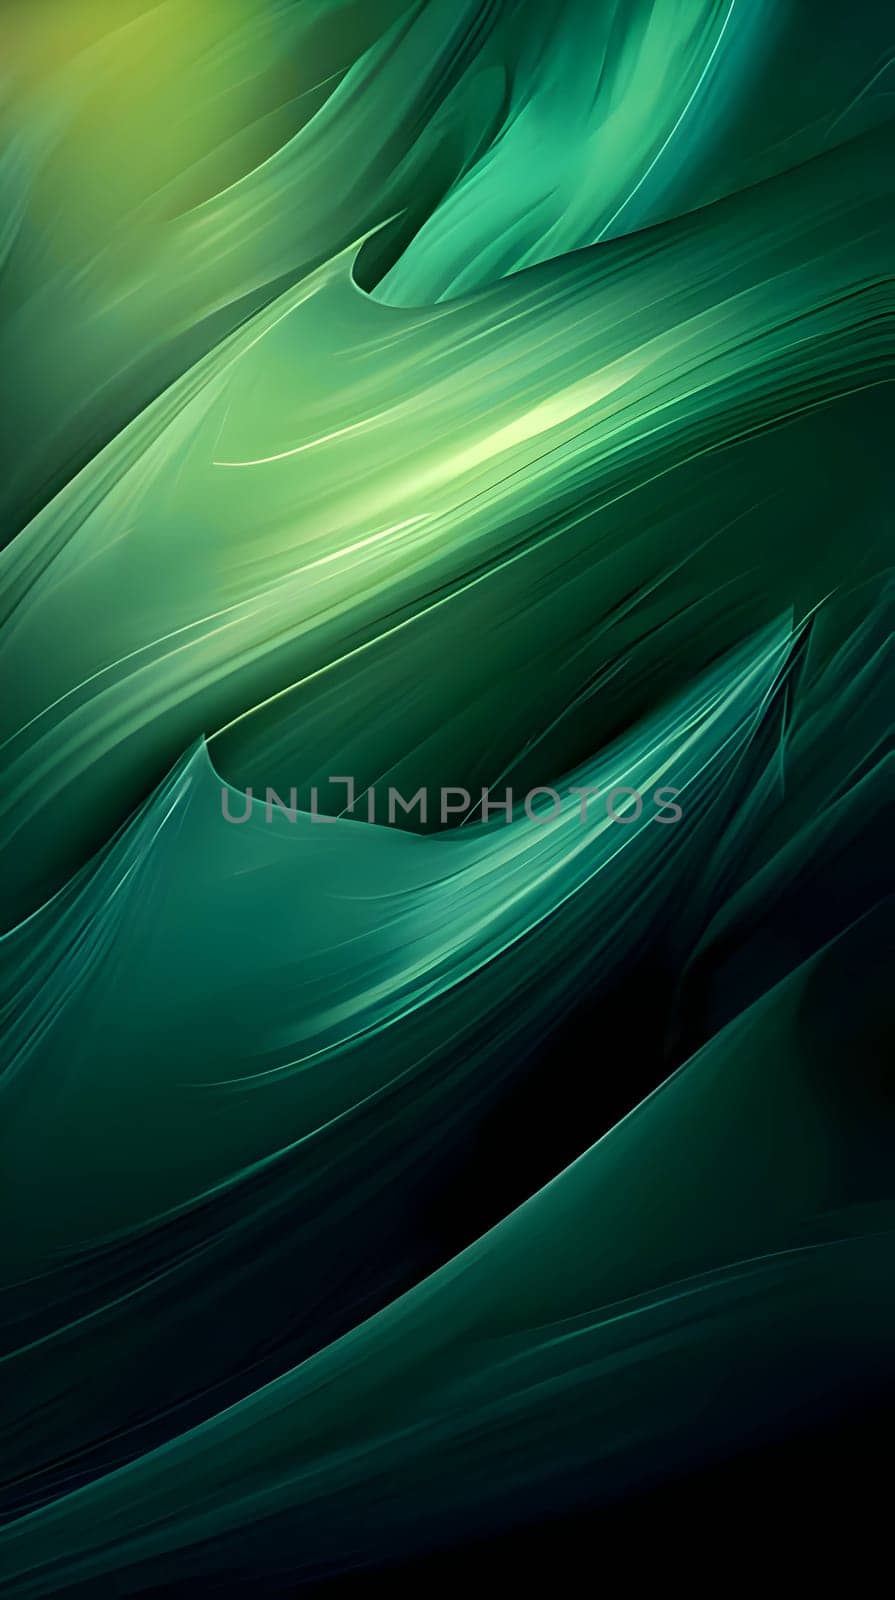 An abstract background wallpaper displaying neon green waves, creating a vibrant and visually captivating design.